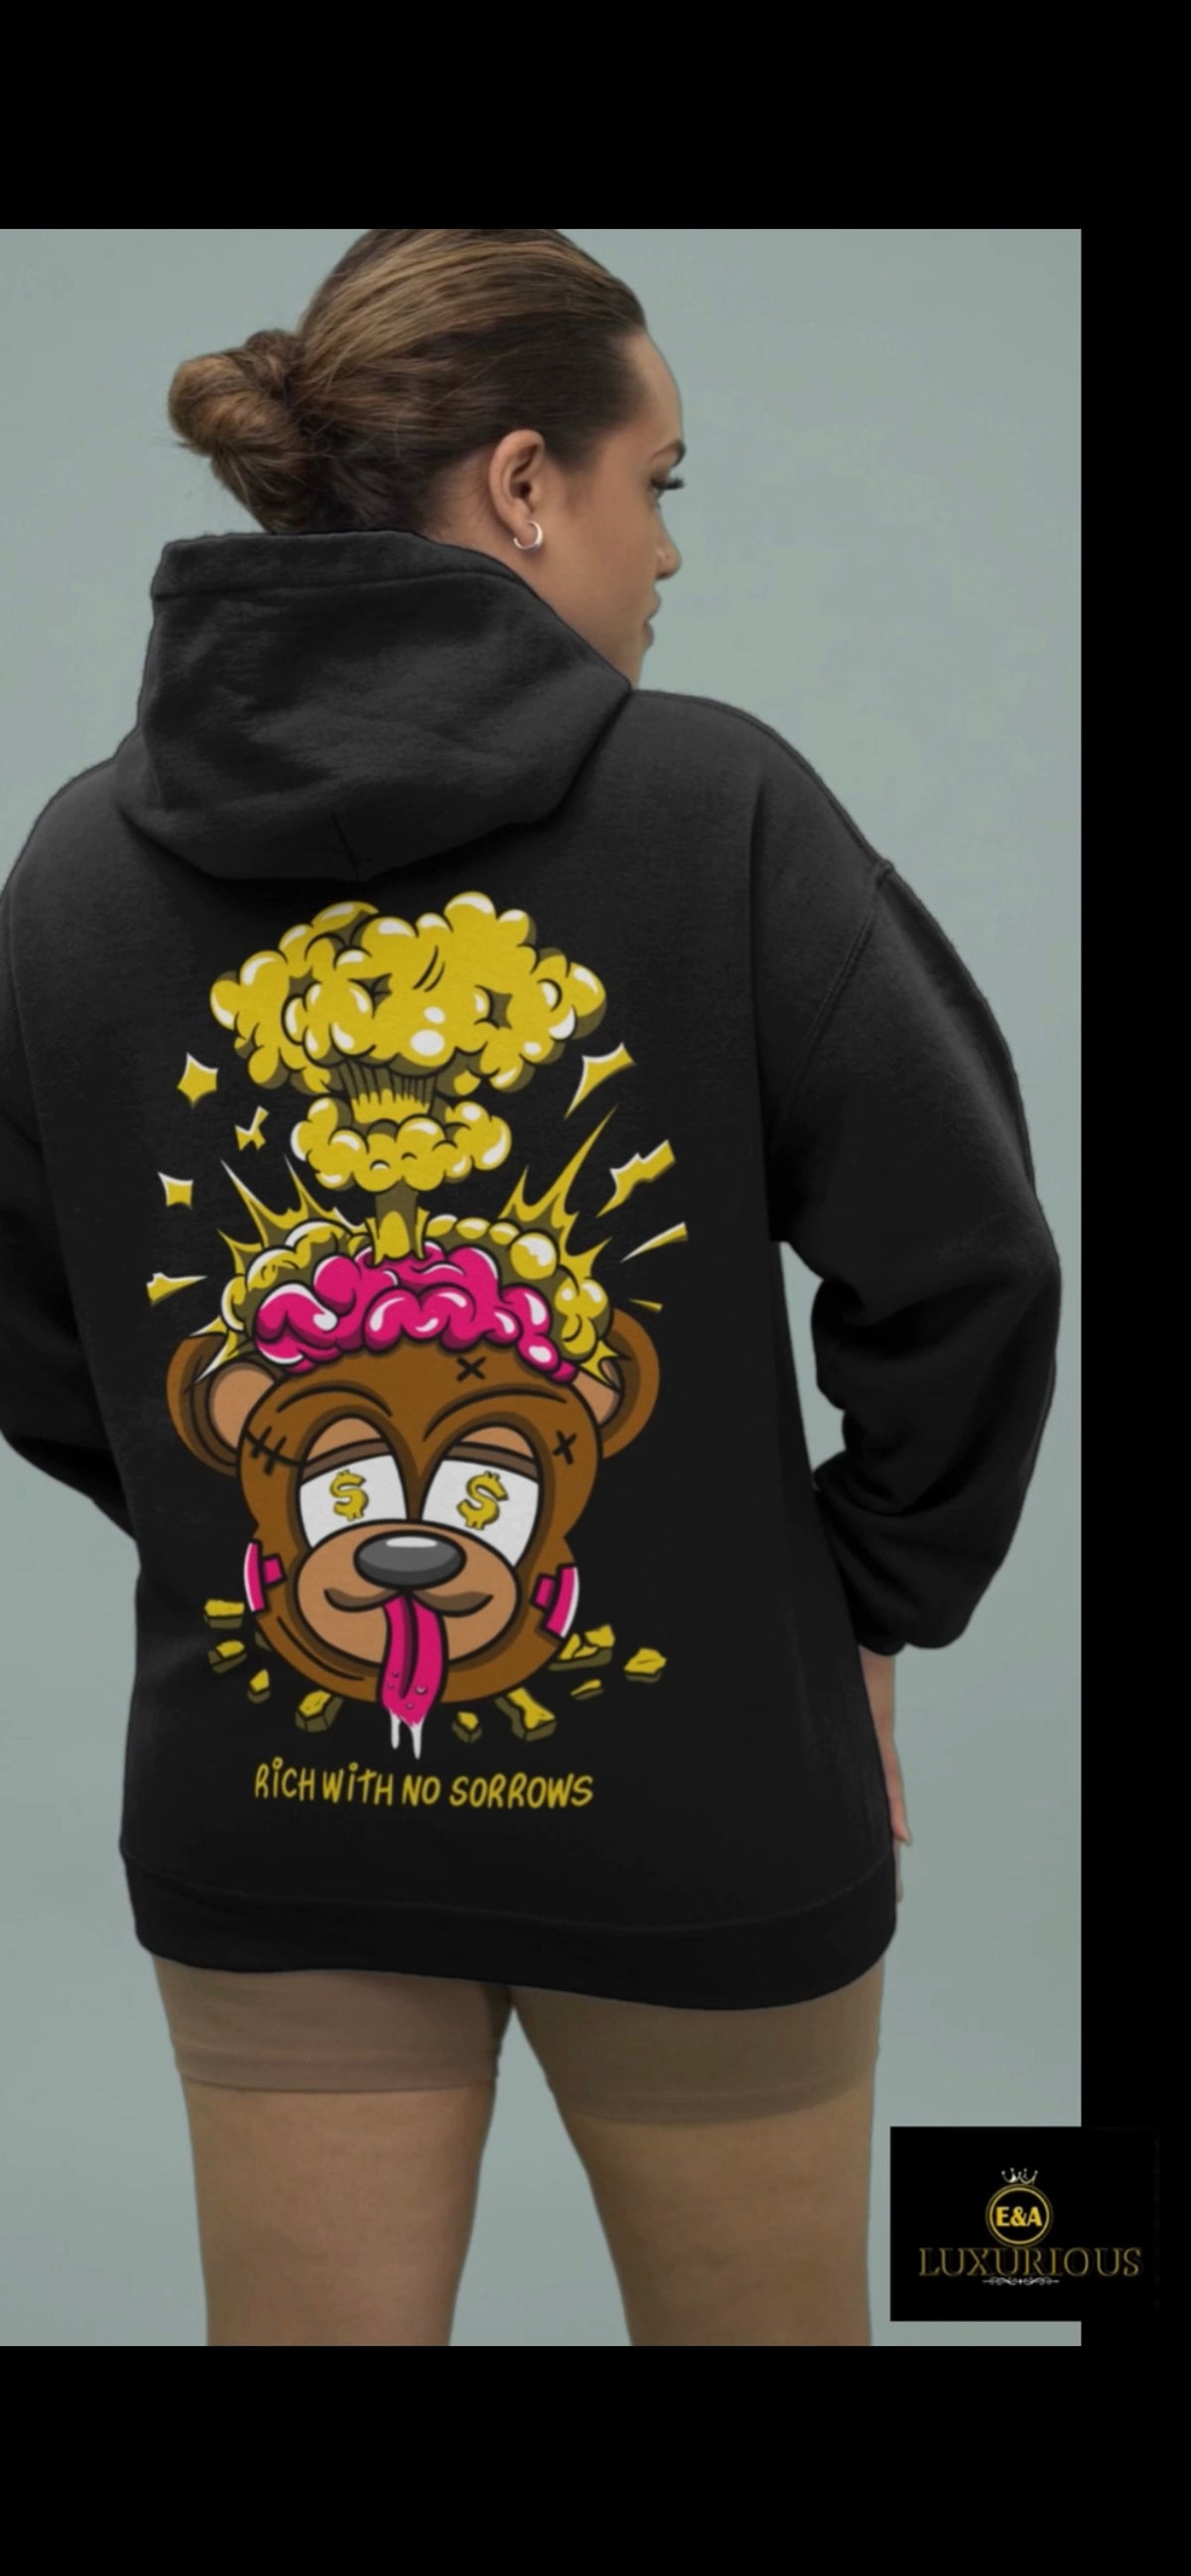 E&A Luxurious (Rich With No Sorrows) Unisex Embroidery Hoodie